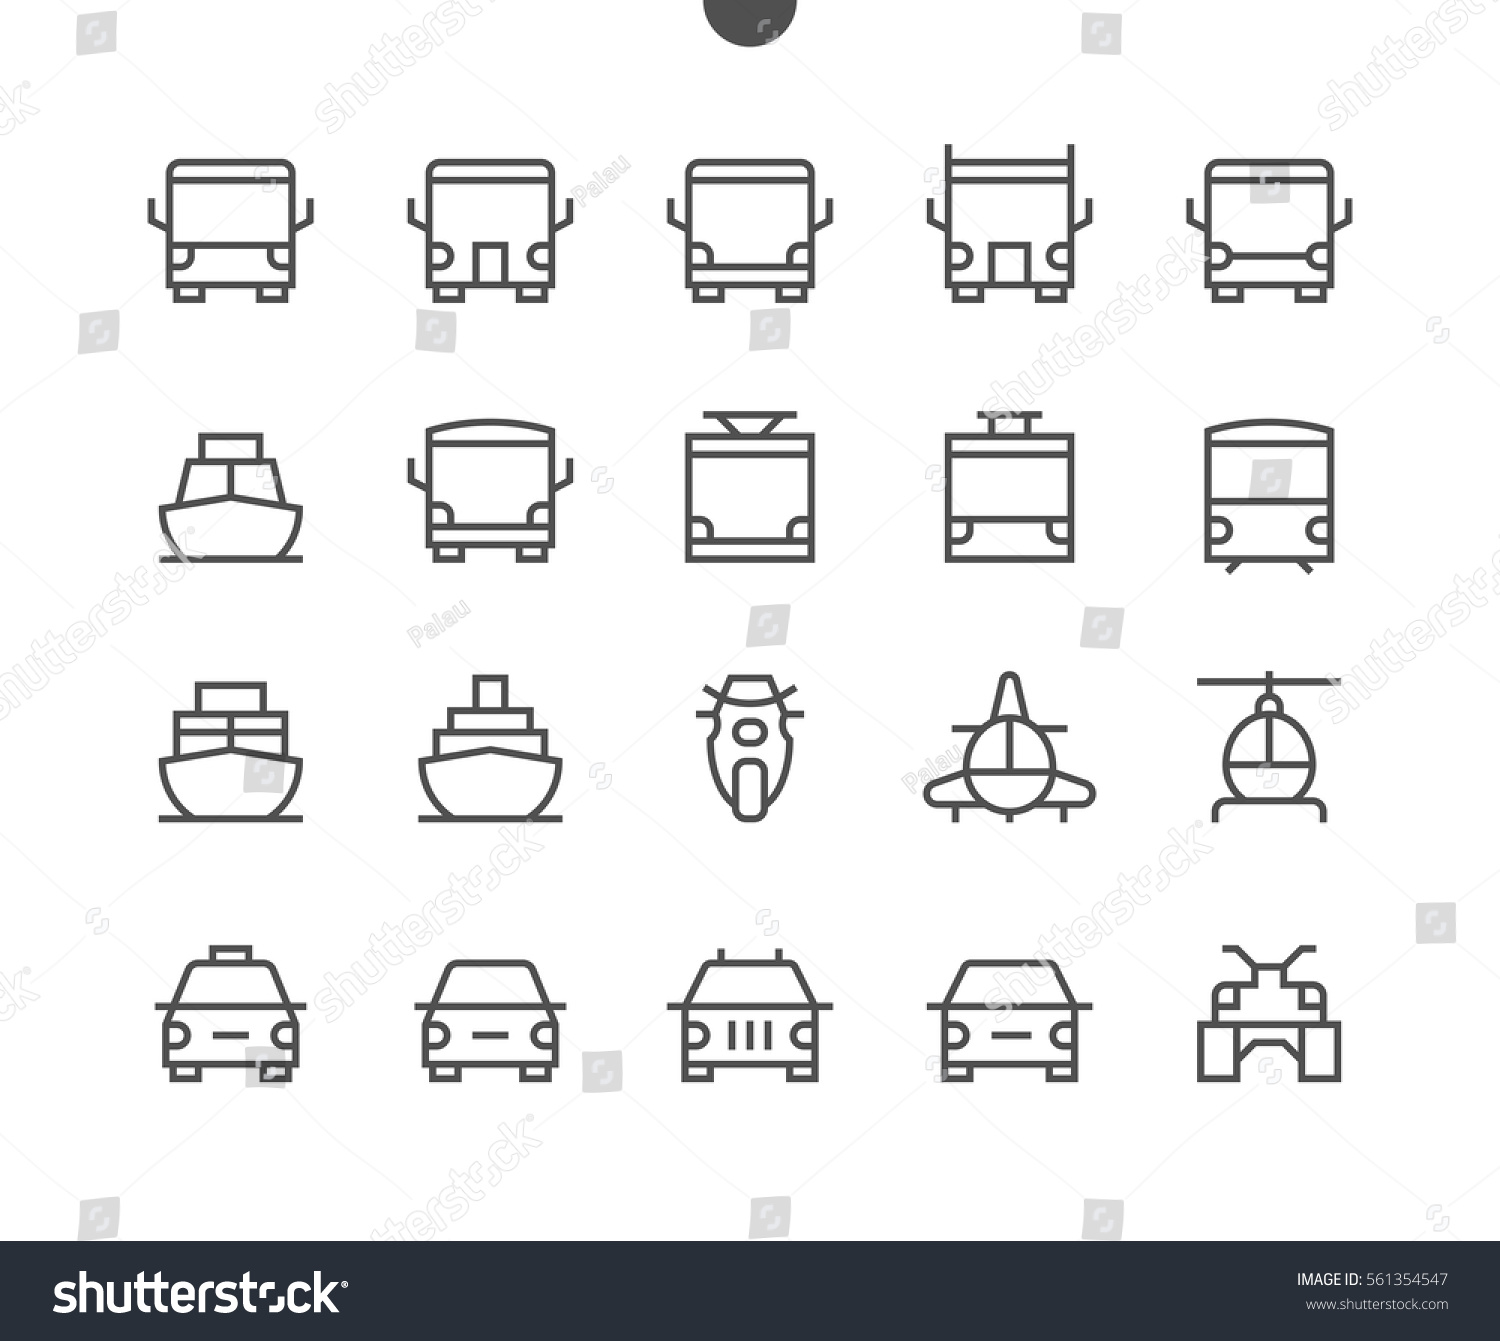 SVG of Transport Front View Outlined Pixel Perfect Well-crafted Vector Thin Line Icons 48x48 Ready for 24x24 Grid for Web Graphics and Apps with Editable Stroke. Simple Minimal Pictogram Part 1-1 svg